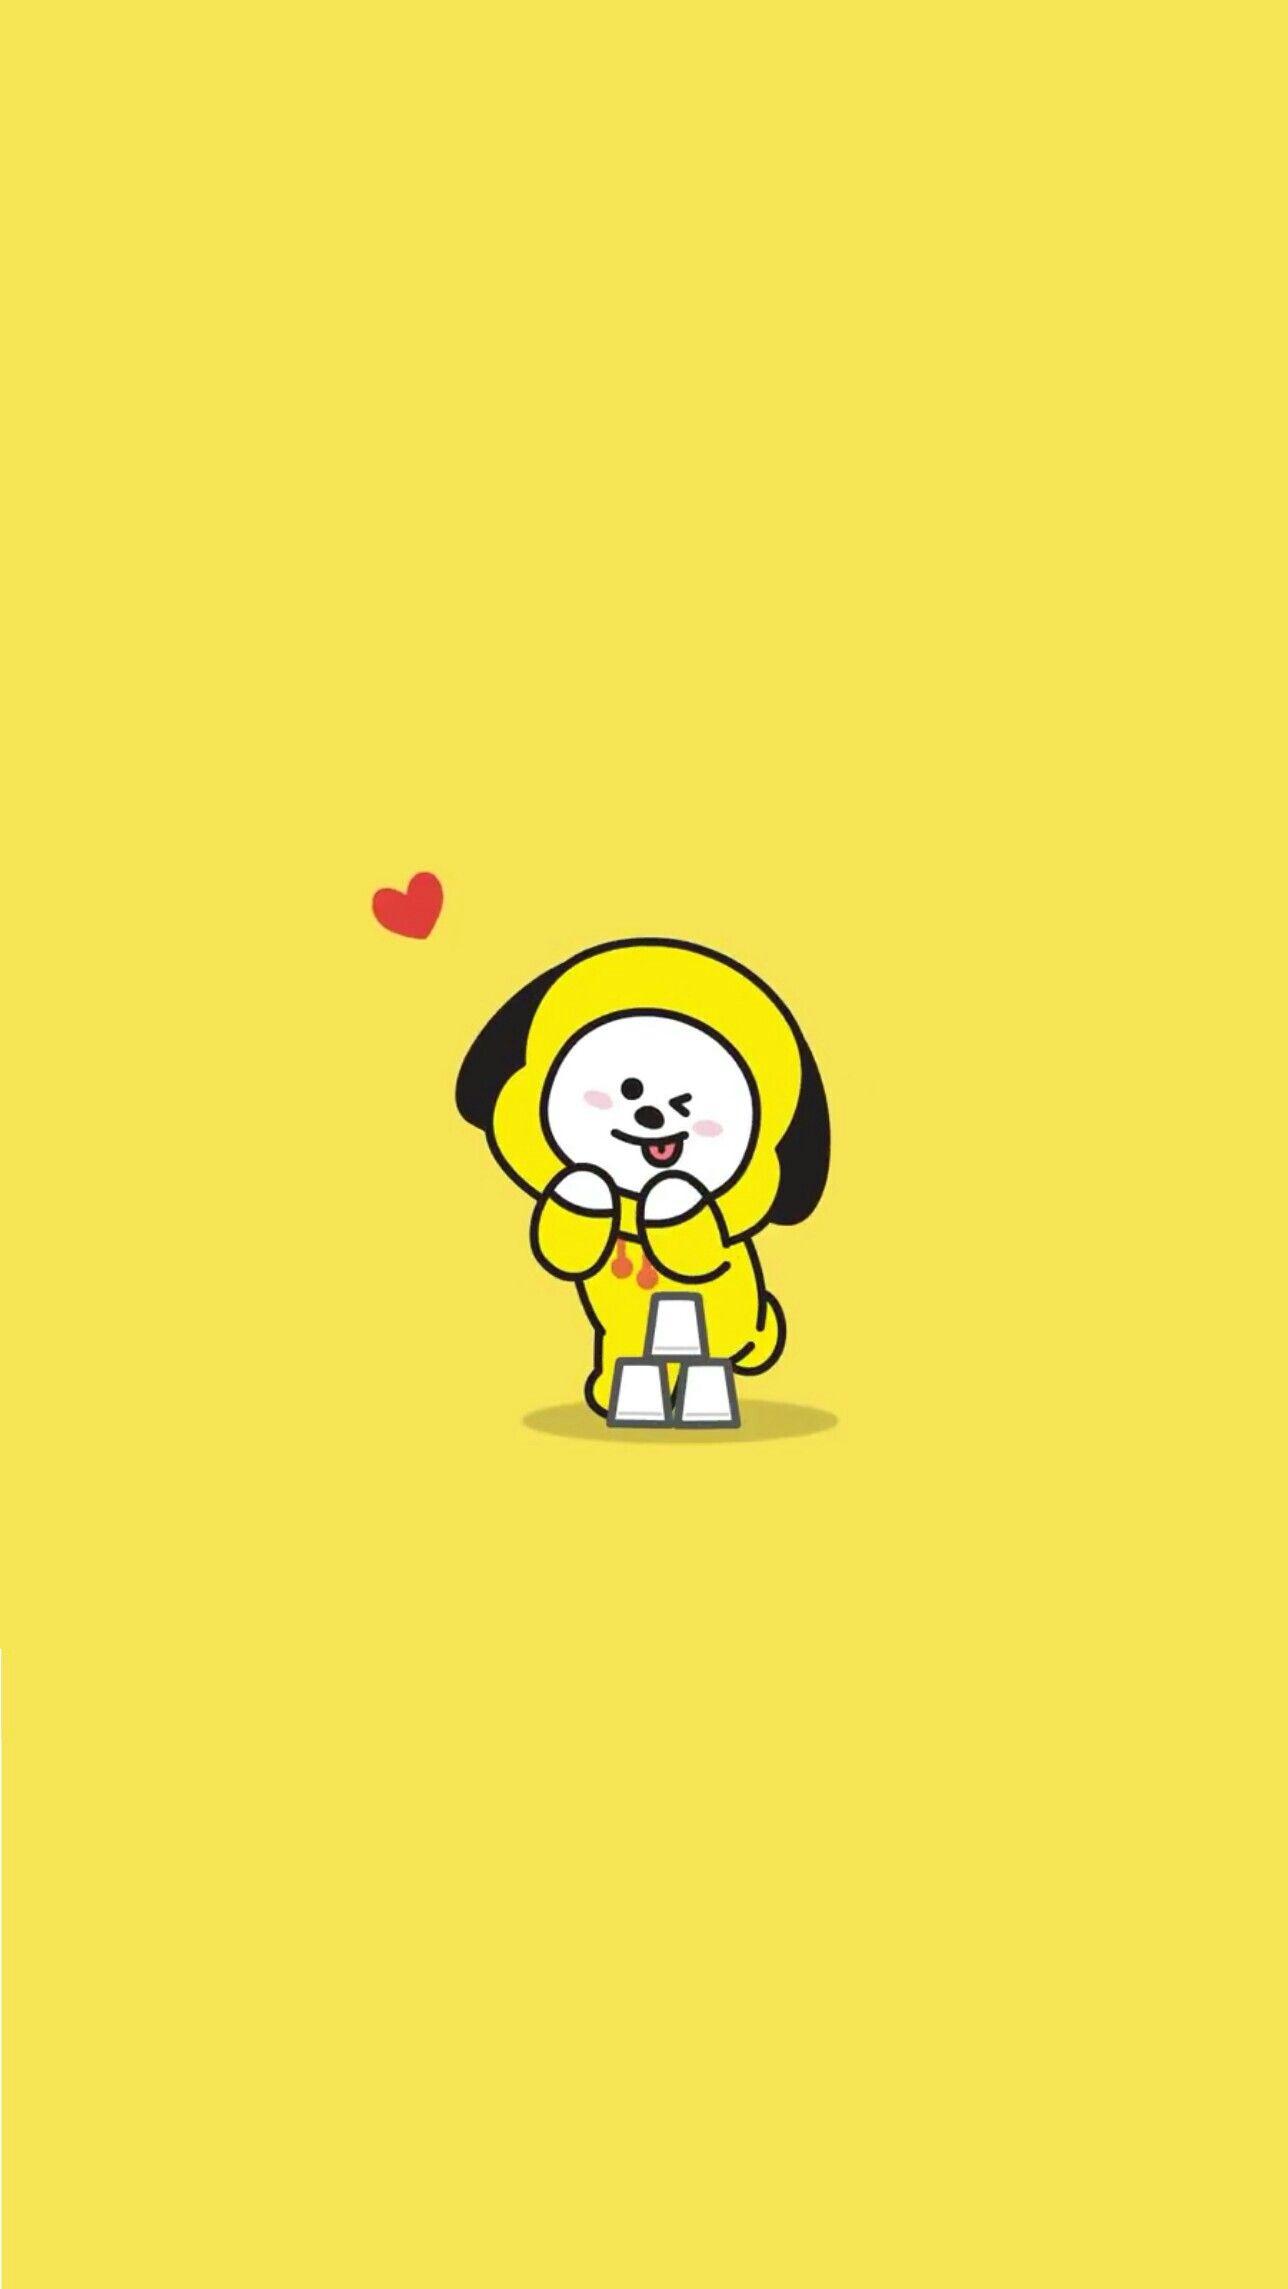 Chimmy Bt21 Wallpapers Top Free Chimmy Bt21 Backgrounds Wallpaperaccess Here are only the best hd laptop wallpapers. chimmy bt21 wallpapers top free